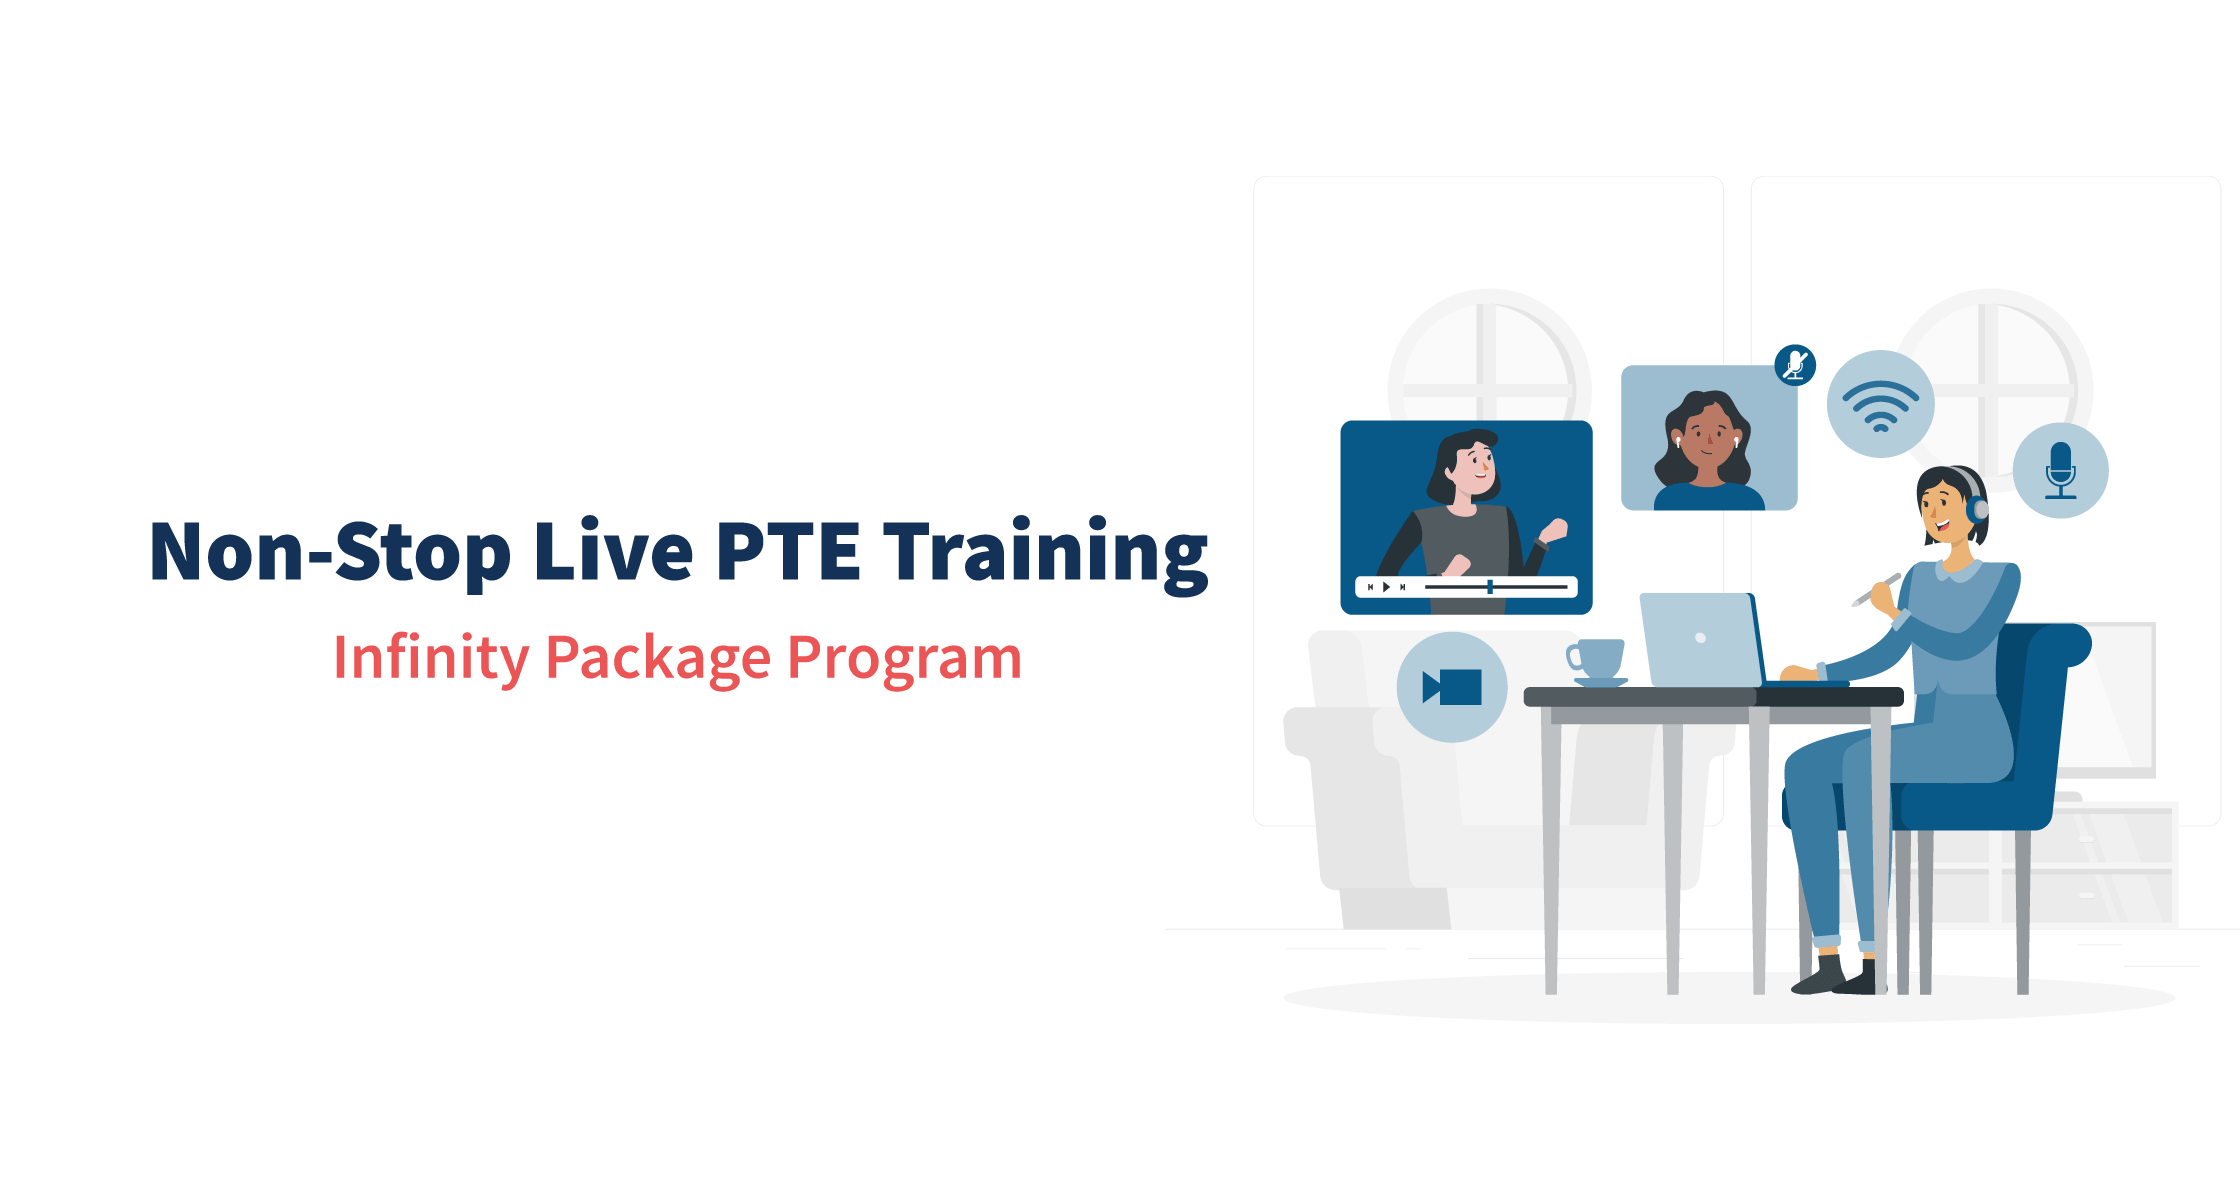 Non-stop PTE Training